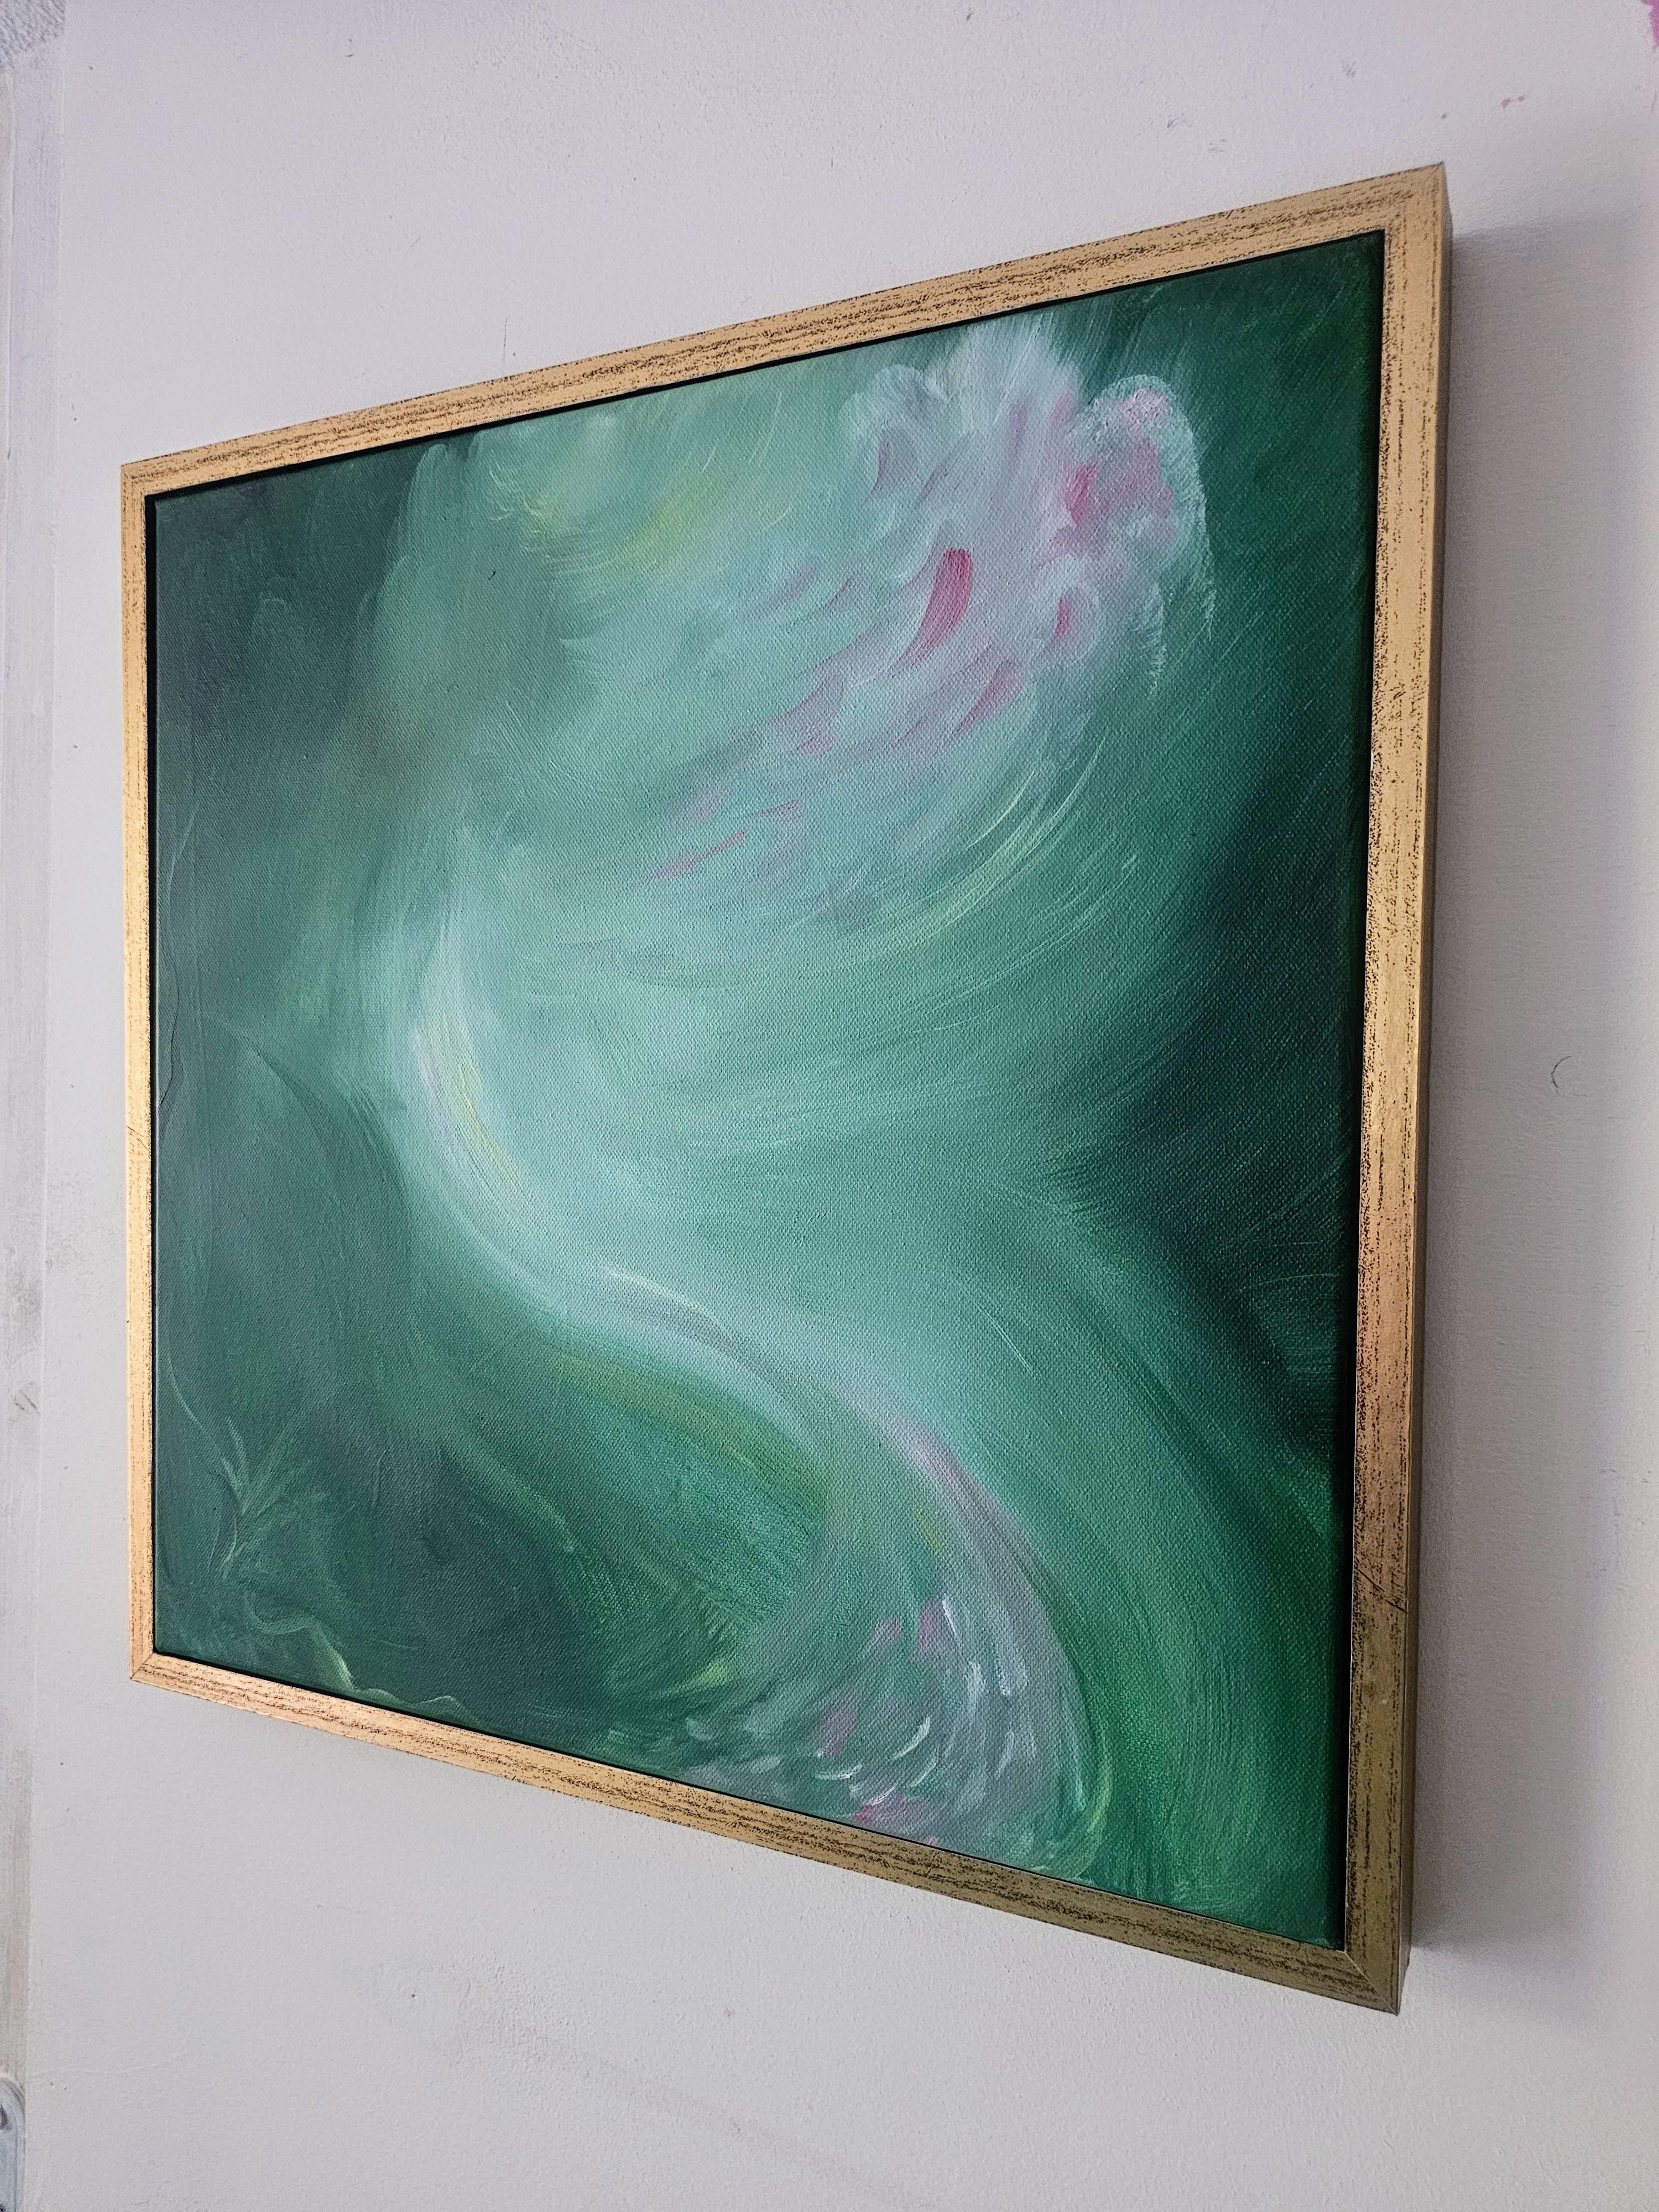 Moth's wing on the forest floor - framed green abstract expressionist painting For Sale 2